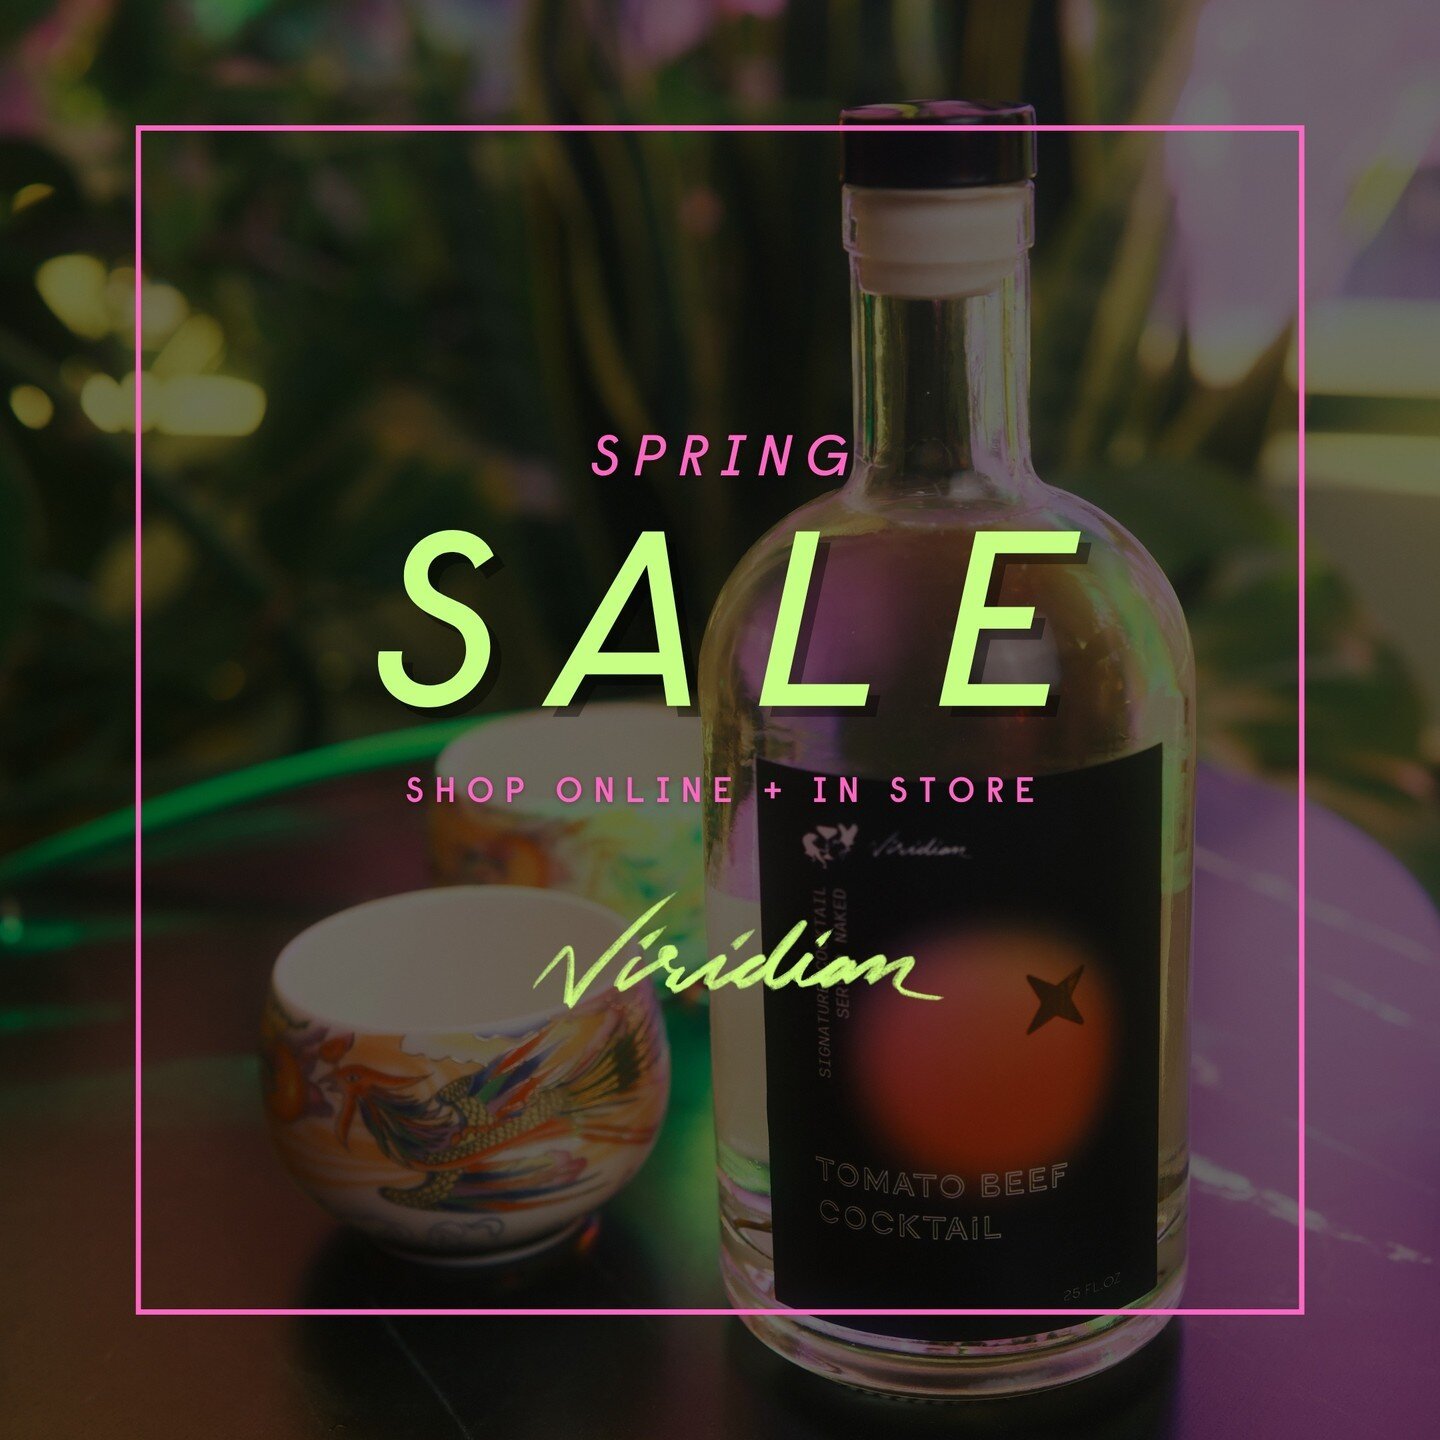 Shop the Viridian Spring Sale now to get the LOWEST PRICE EVER on our Tomato Beef Bottled Cocktail or Limited Edition Viridian Signature Hoodie. Supplies are super limited, so reserve yours online today or snag one in-store. On sale through Friday, A